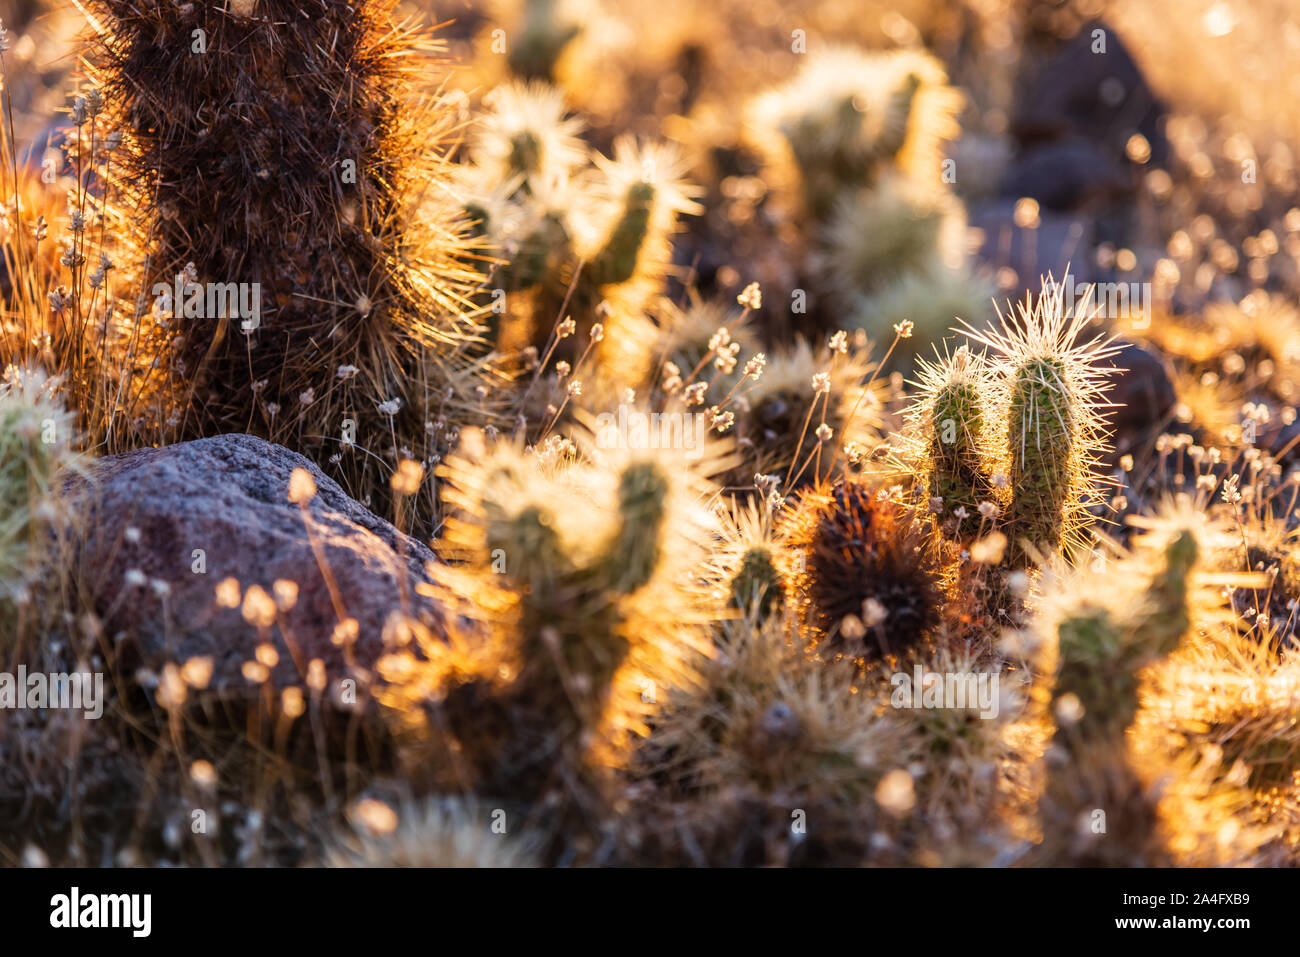 A close up photo of a bunch of baby cholla cacti amongst other desert plants illuminated by golden hour sunlight. Stock Photo